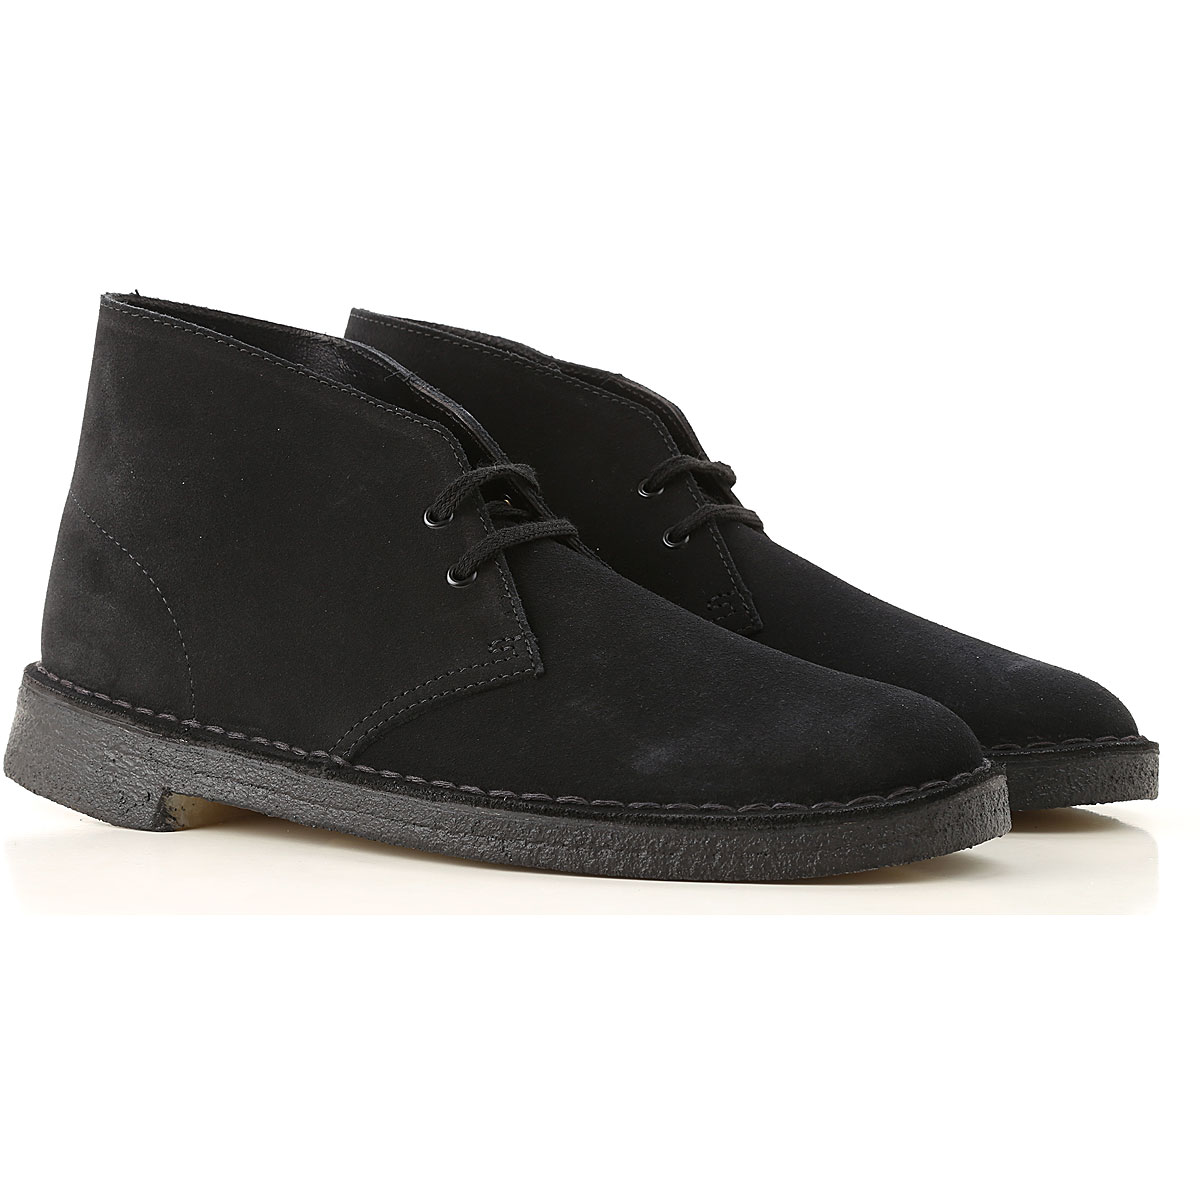 Mens Shoes Clarks, Style code: 26107882-7-060